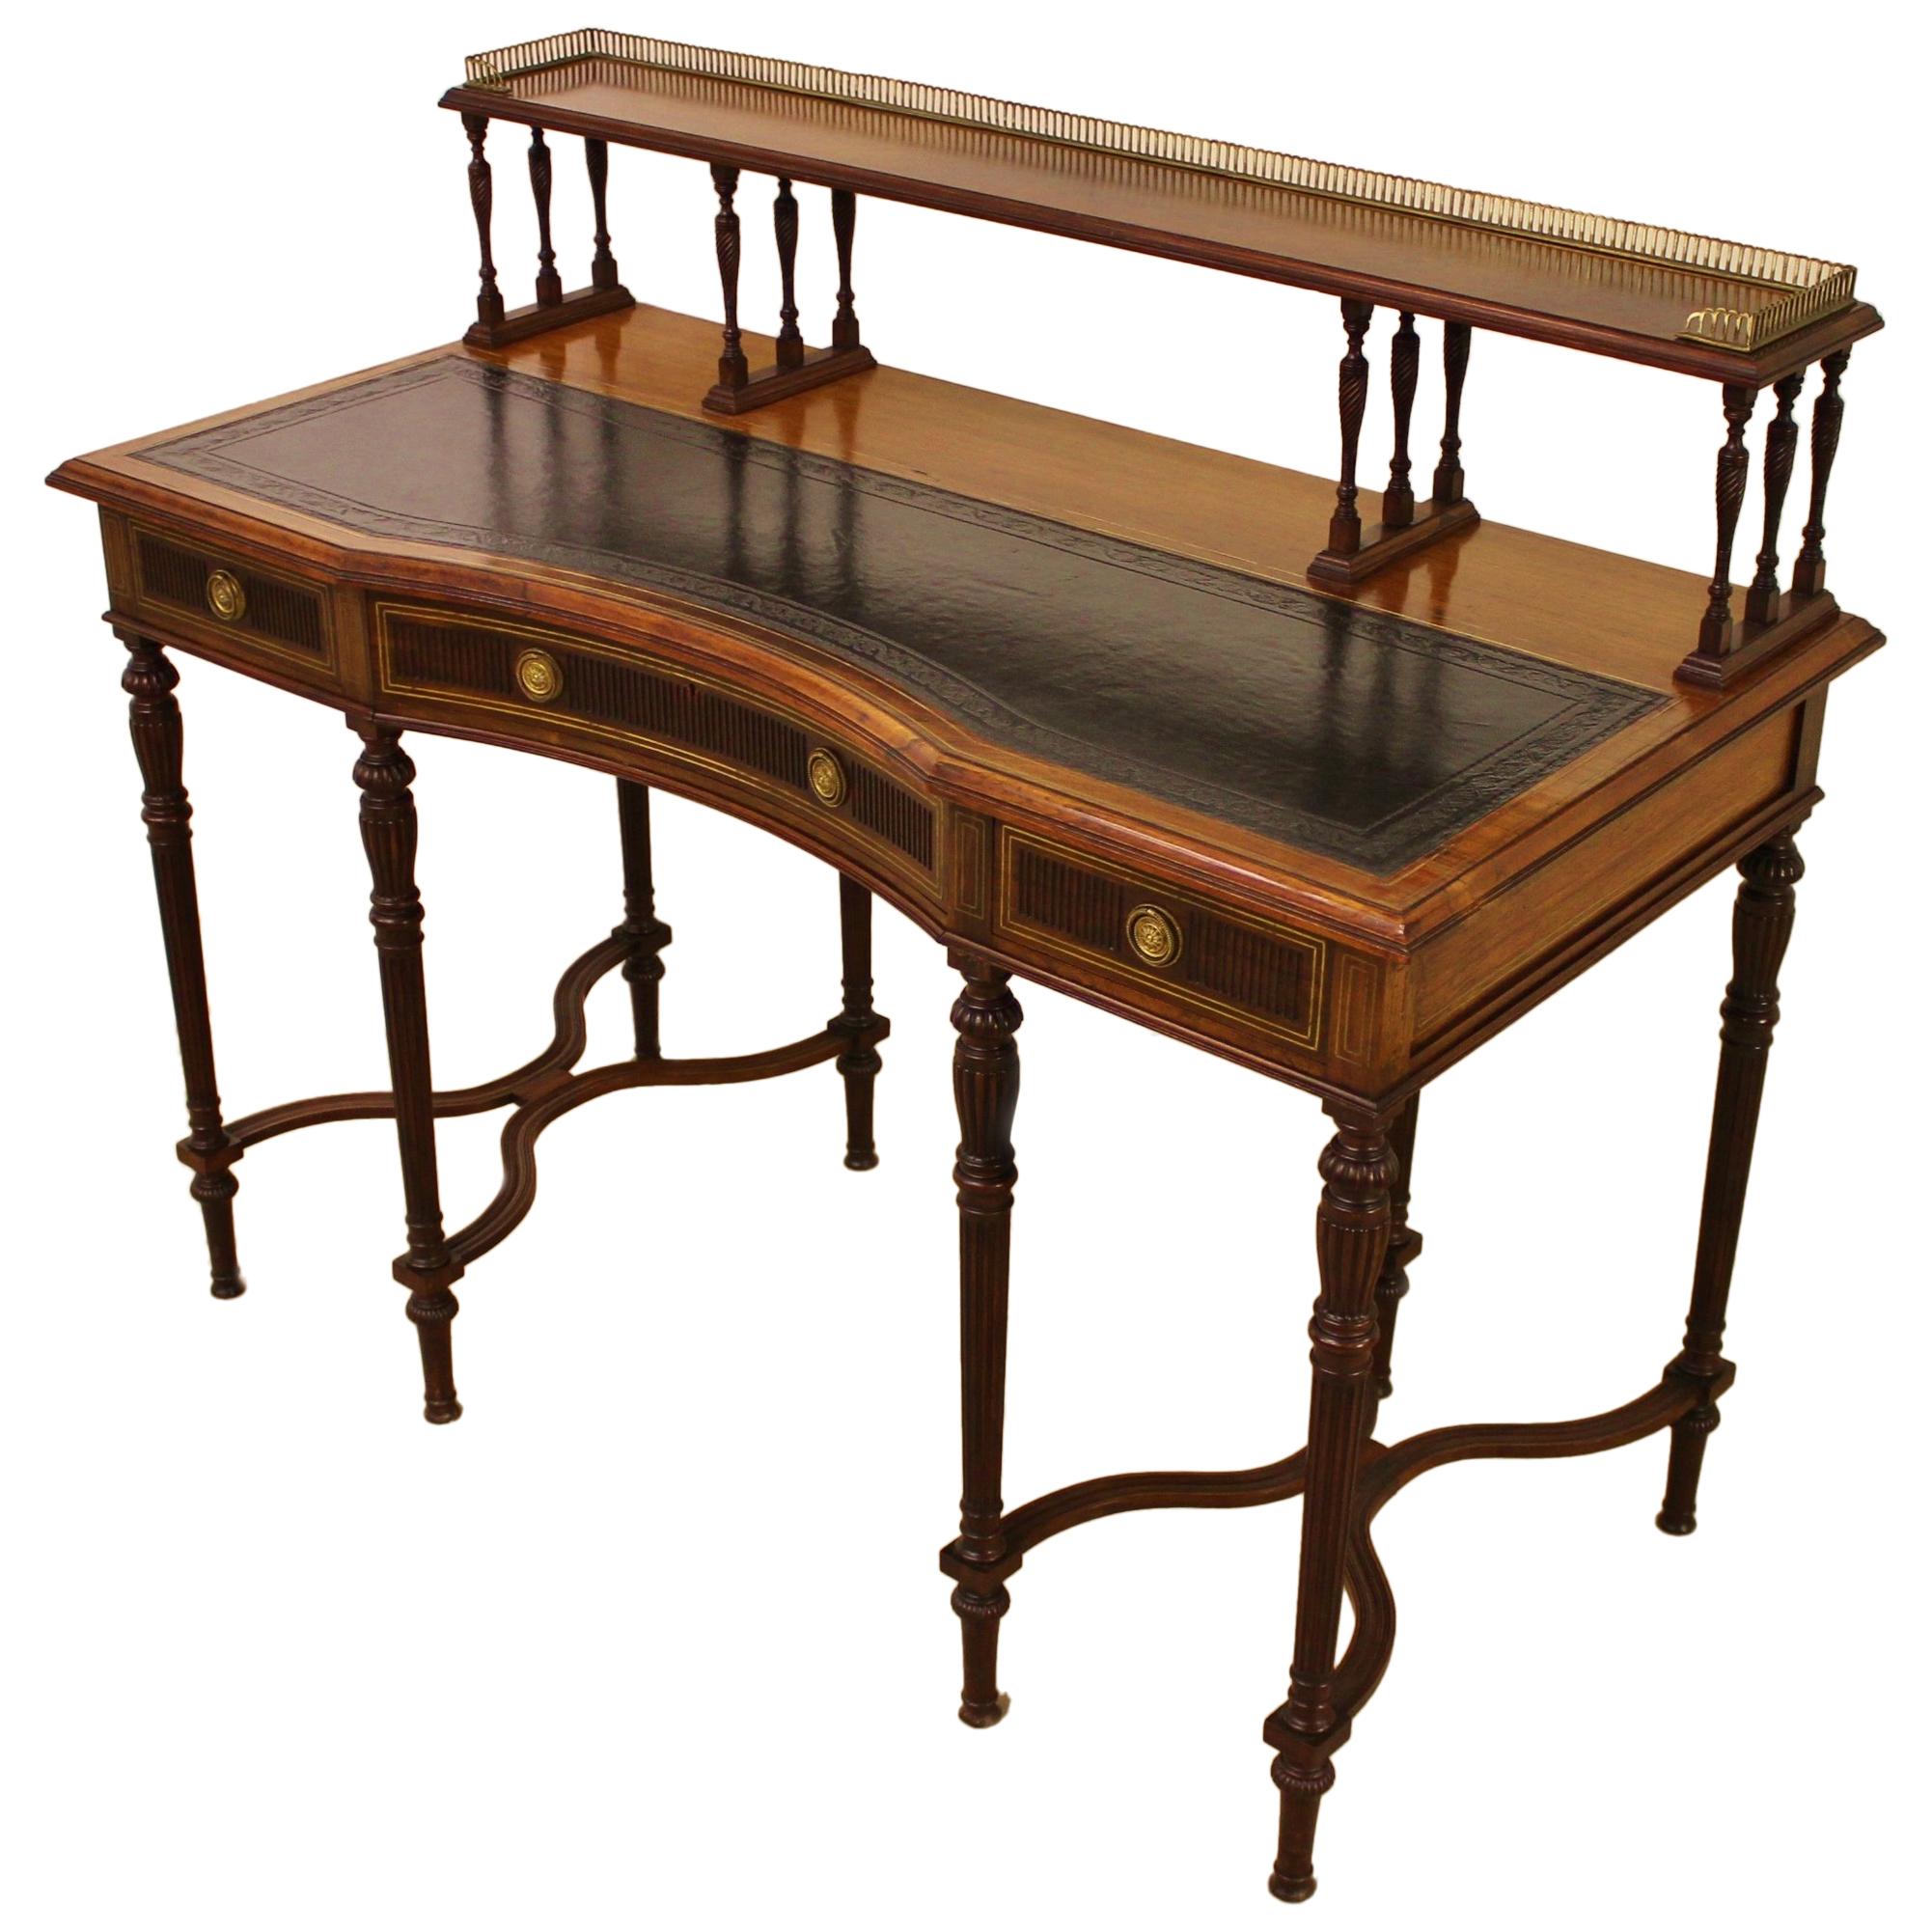 Late 19th Century Victorian Inlaid Rosewood Writing Desk by Collinson and Lock For Sale